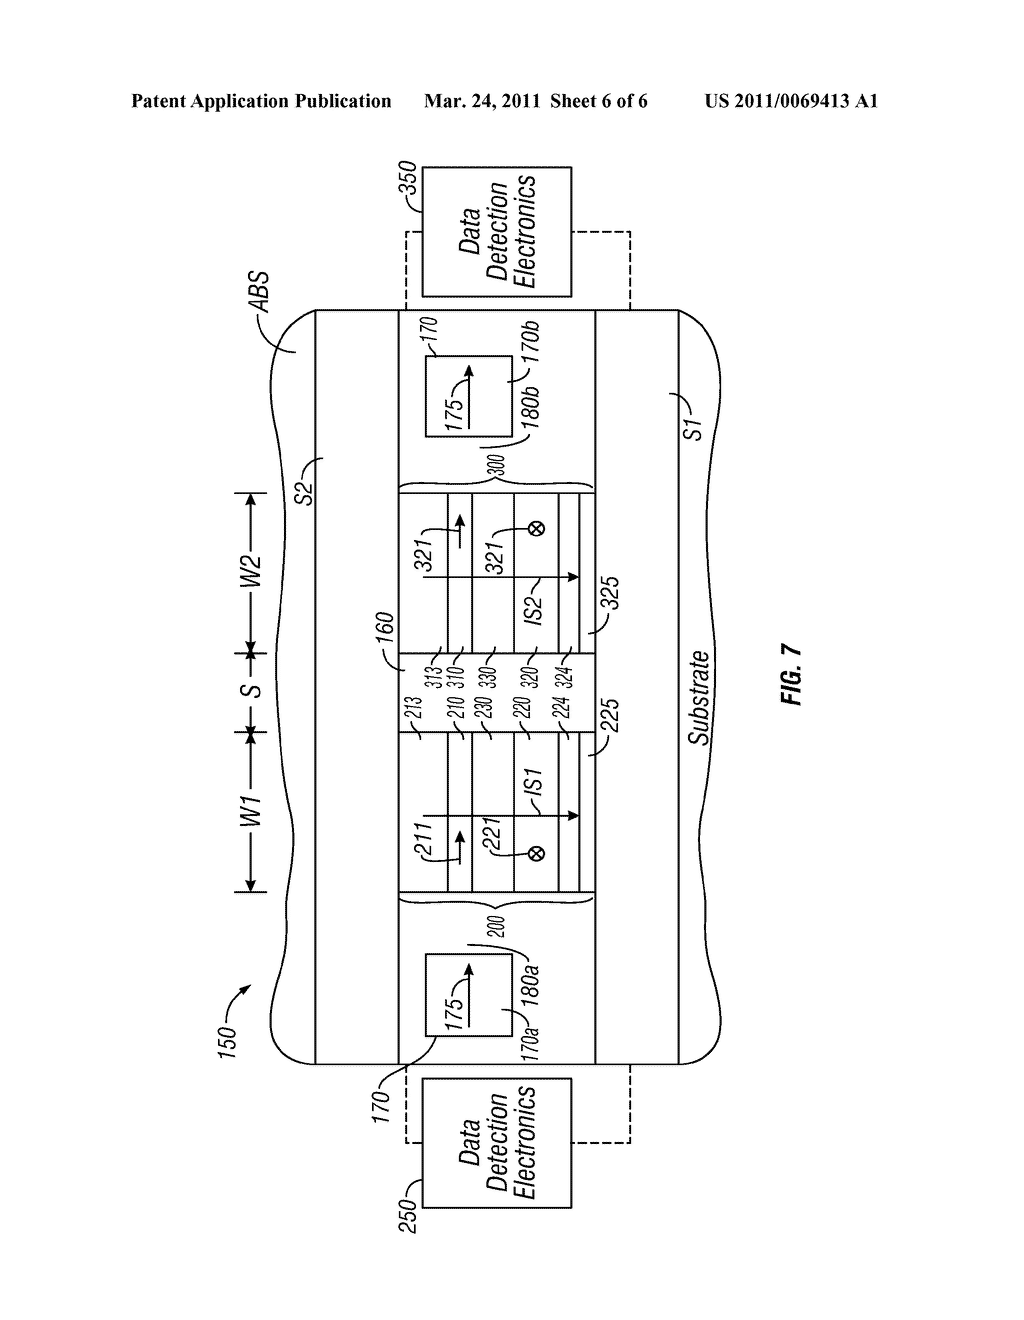 CURRENT-PERPENDICULAR-TO-THE-PLANE (CPP) MAGNETORESISTIVE READ HEAD WITH MULTIPLE SENSING ELEMENTS FOR PATTERNED-MEDIA - diagram, schematic, and image 07